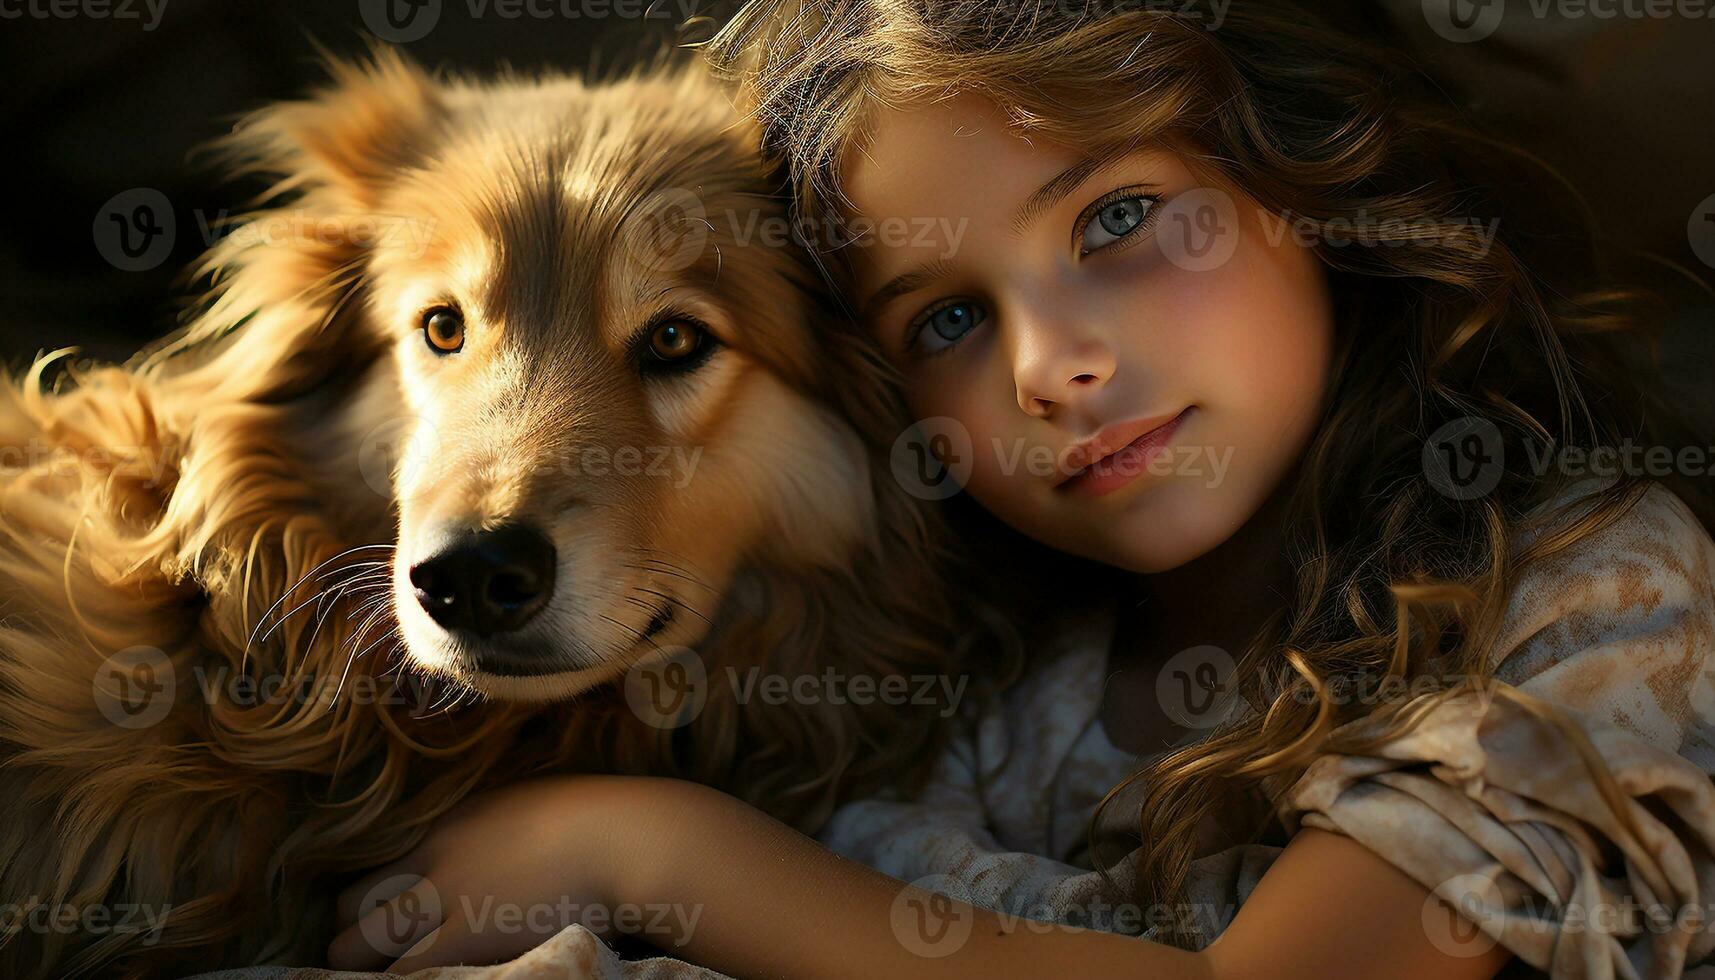 Cute child smiling, embracing playful puppy, pure joy and love generated by AI photo